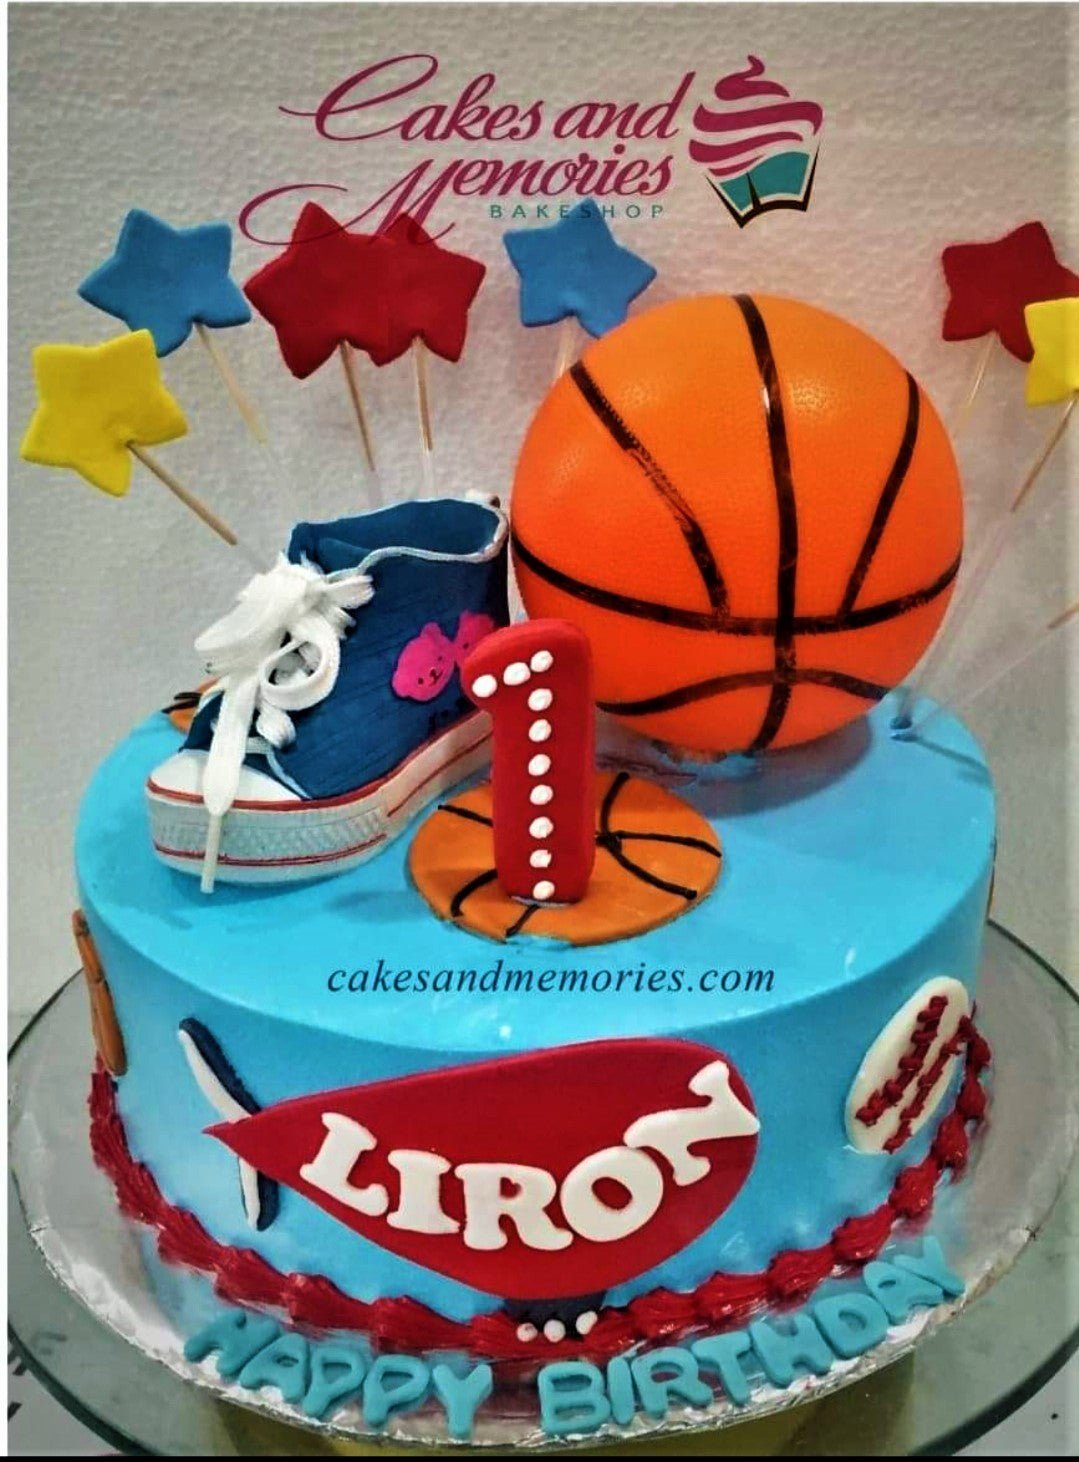 Basketball Cakes And Memories Bakeshop 